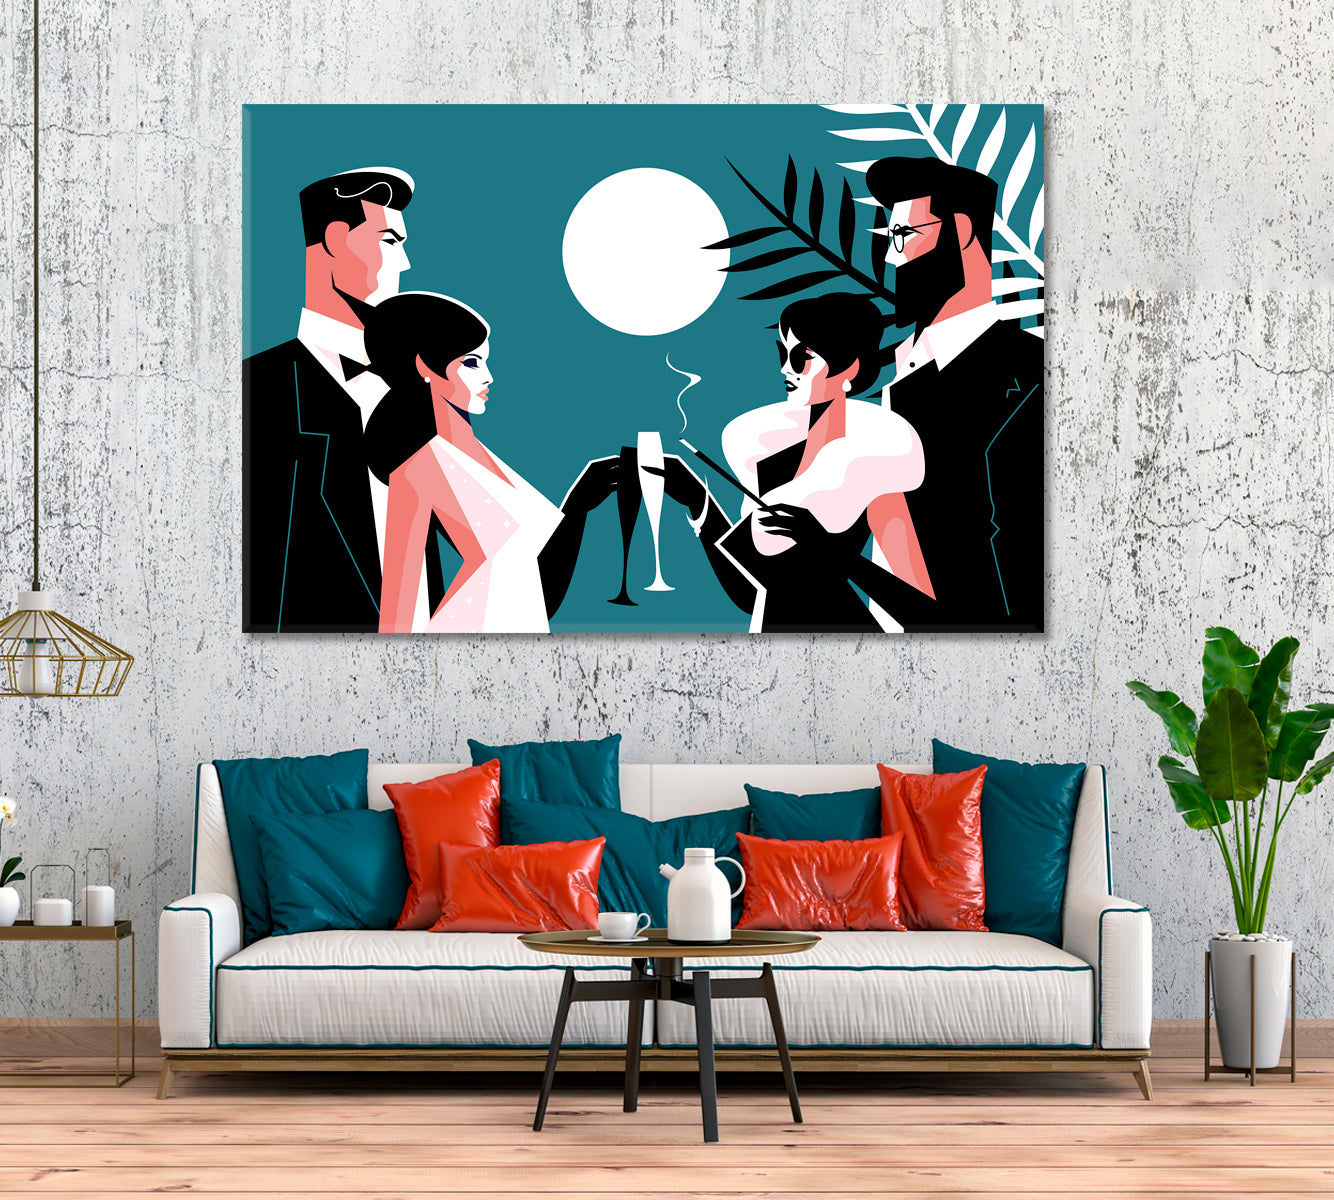 Elegant Couples at Fashion Night Party Canvas Print ArtLexy 1 Panel 24"x16" inches 